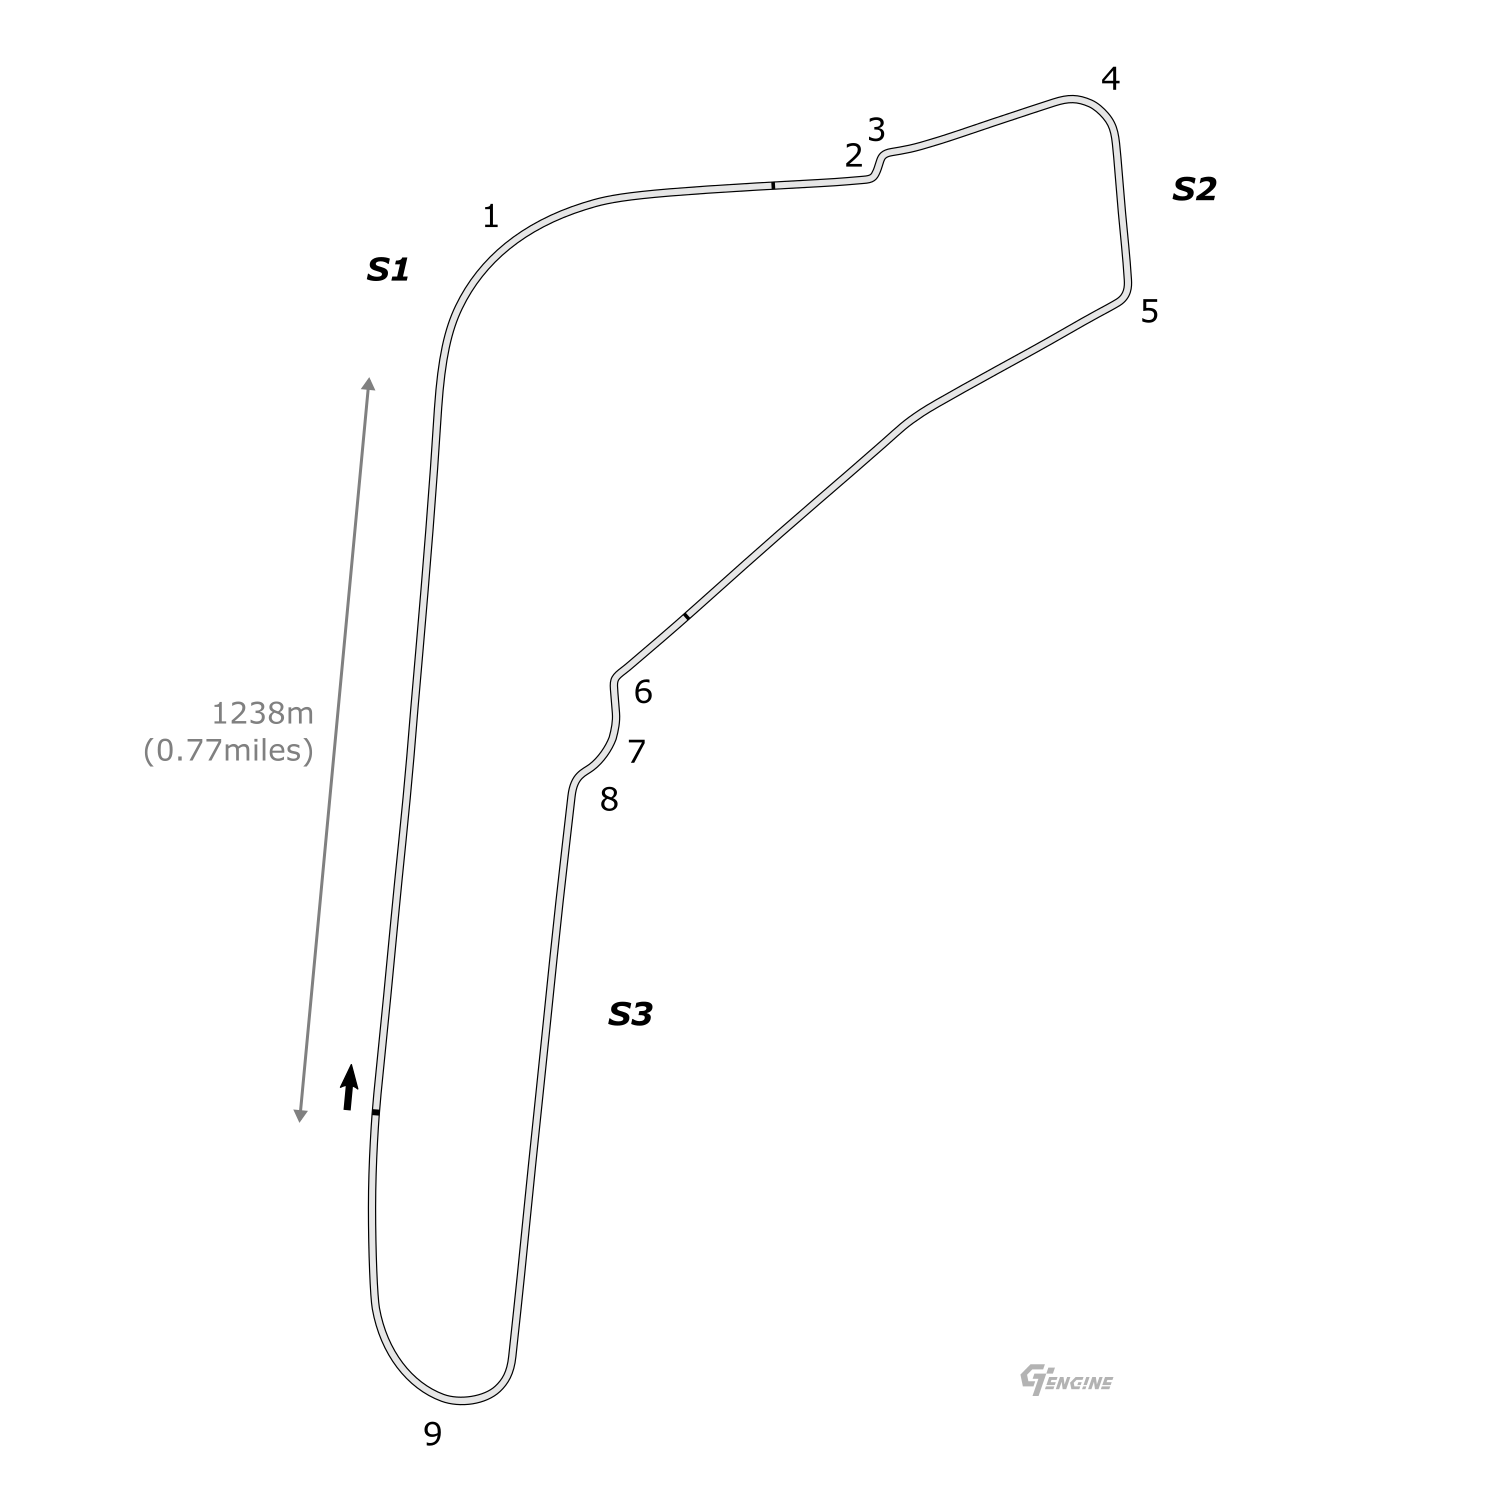 Monza No Chicane track map